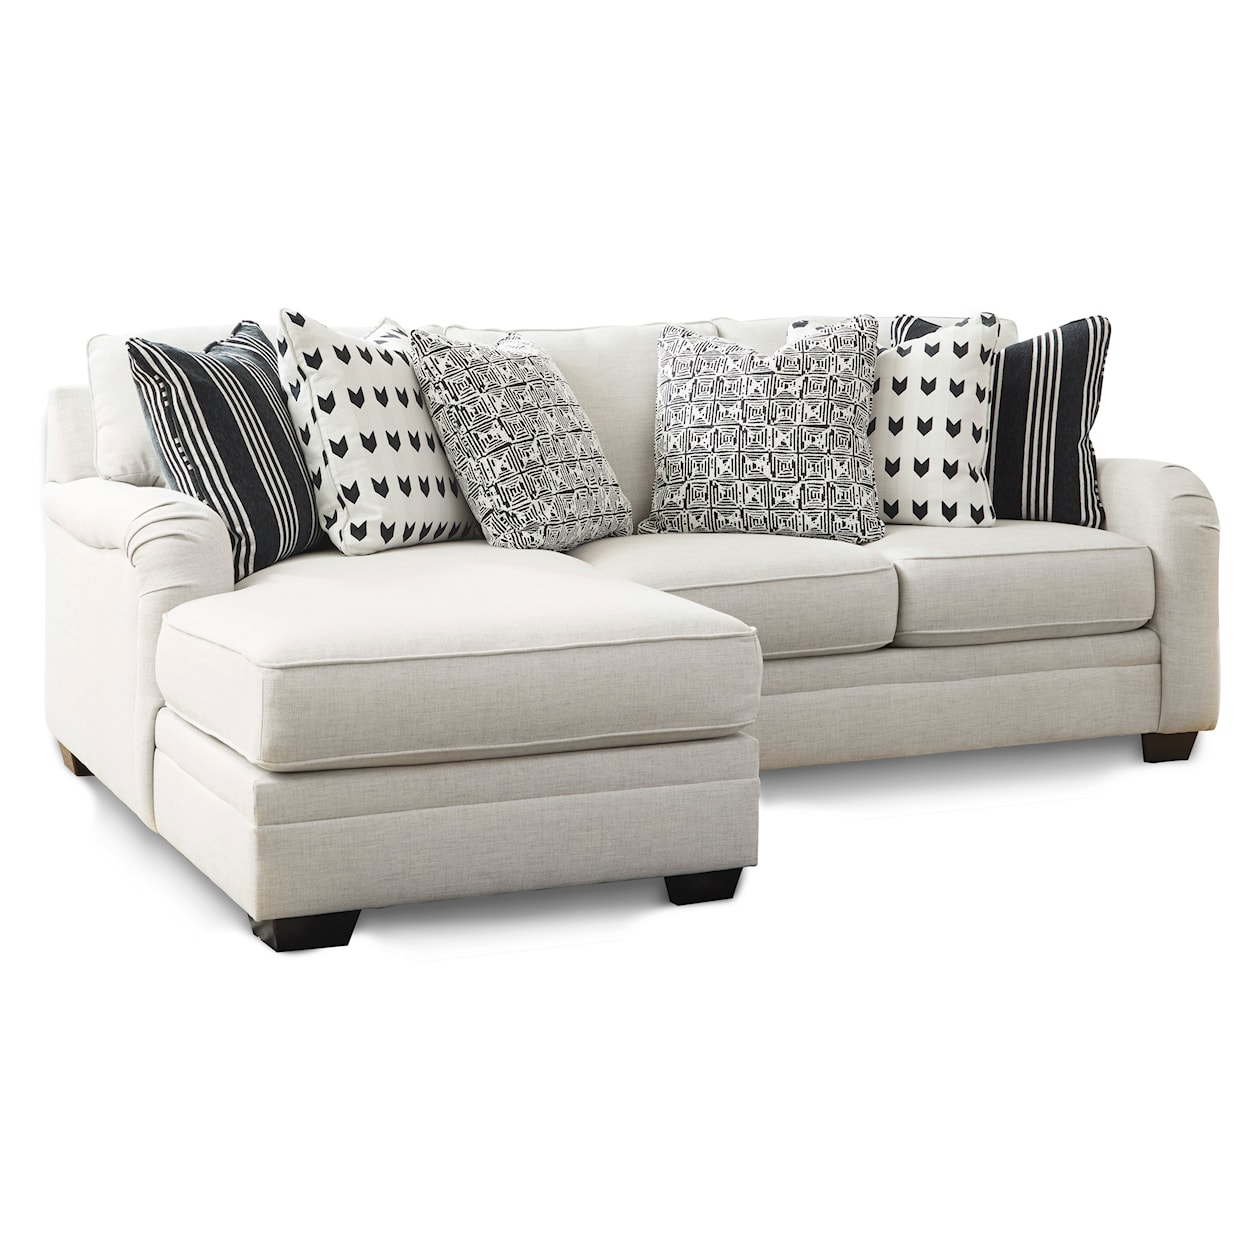 Signature Huntsworth 2-Piece Sectional with Chaise